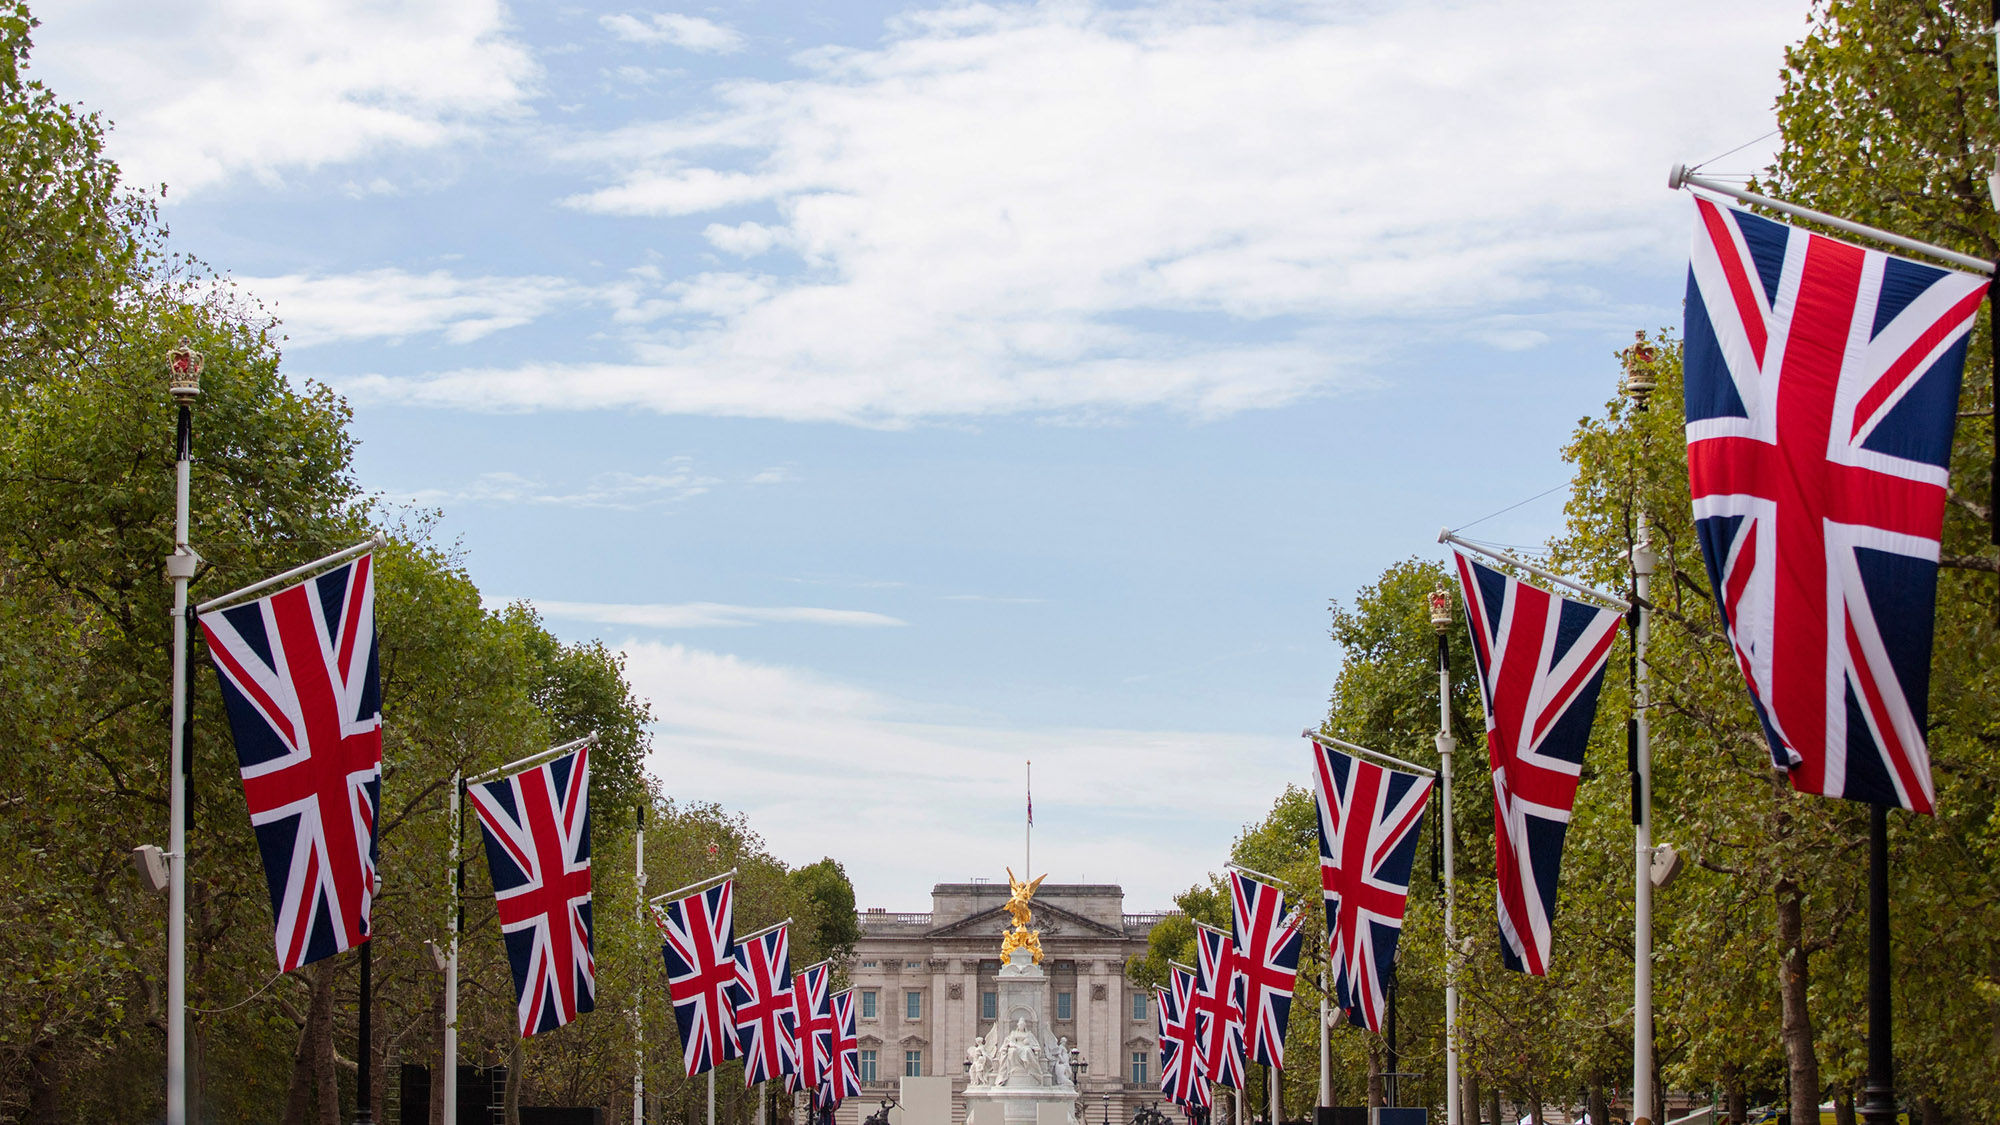 Royal fans give London tourism a bump amid U.K. economic woes: Travel Weekly